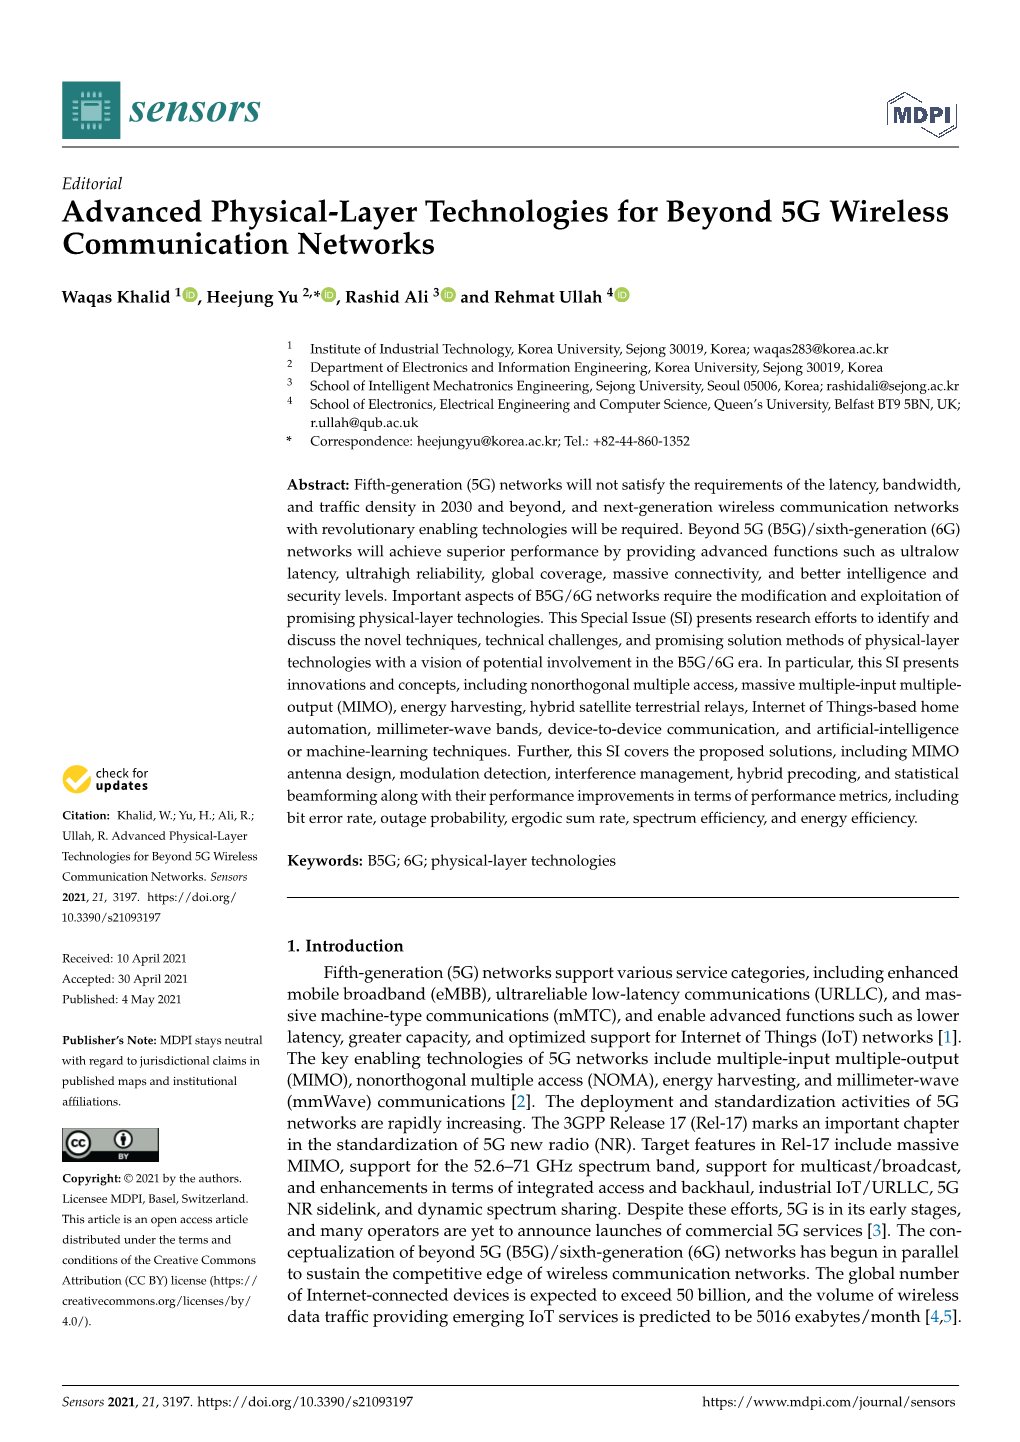 Advanced Physical-Layer Technologies for Beyond 5G Wireless Communication Networks